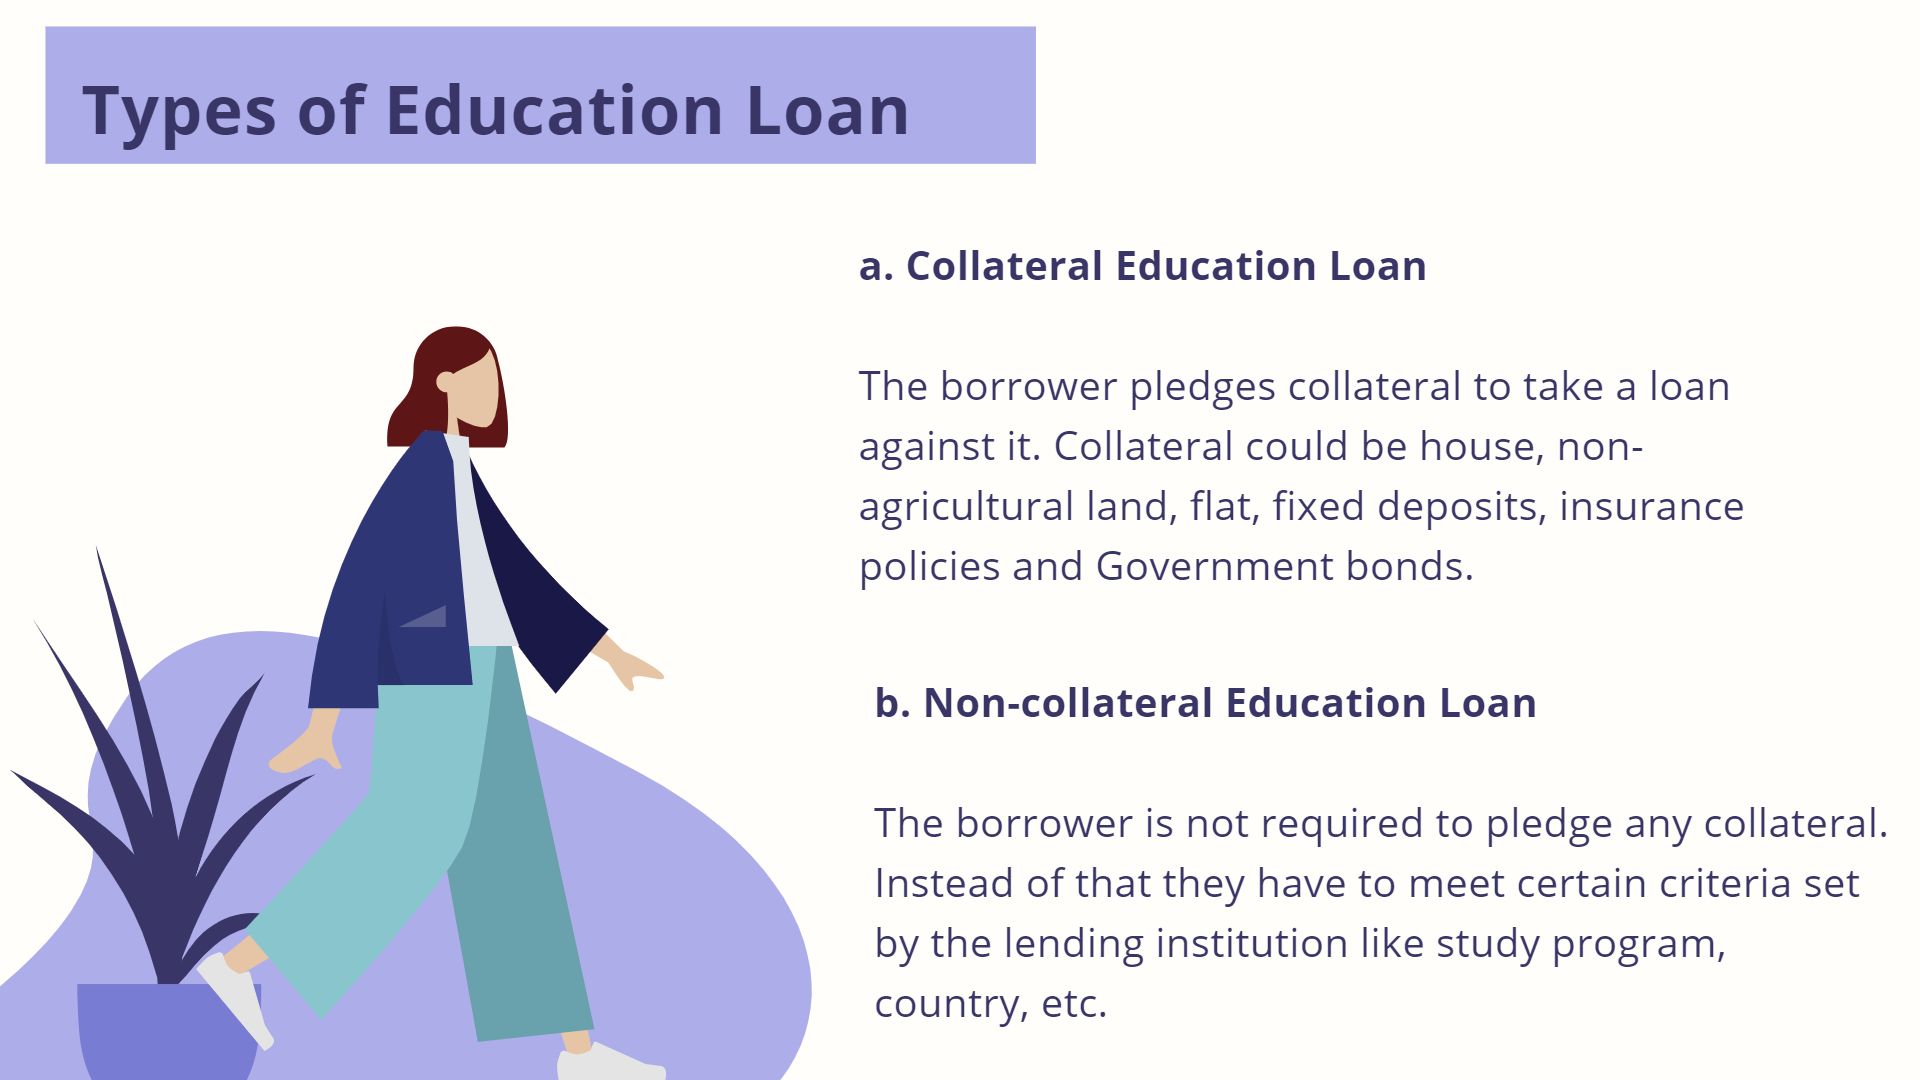 Types of education loans